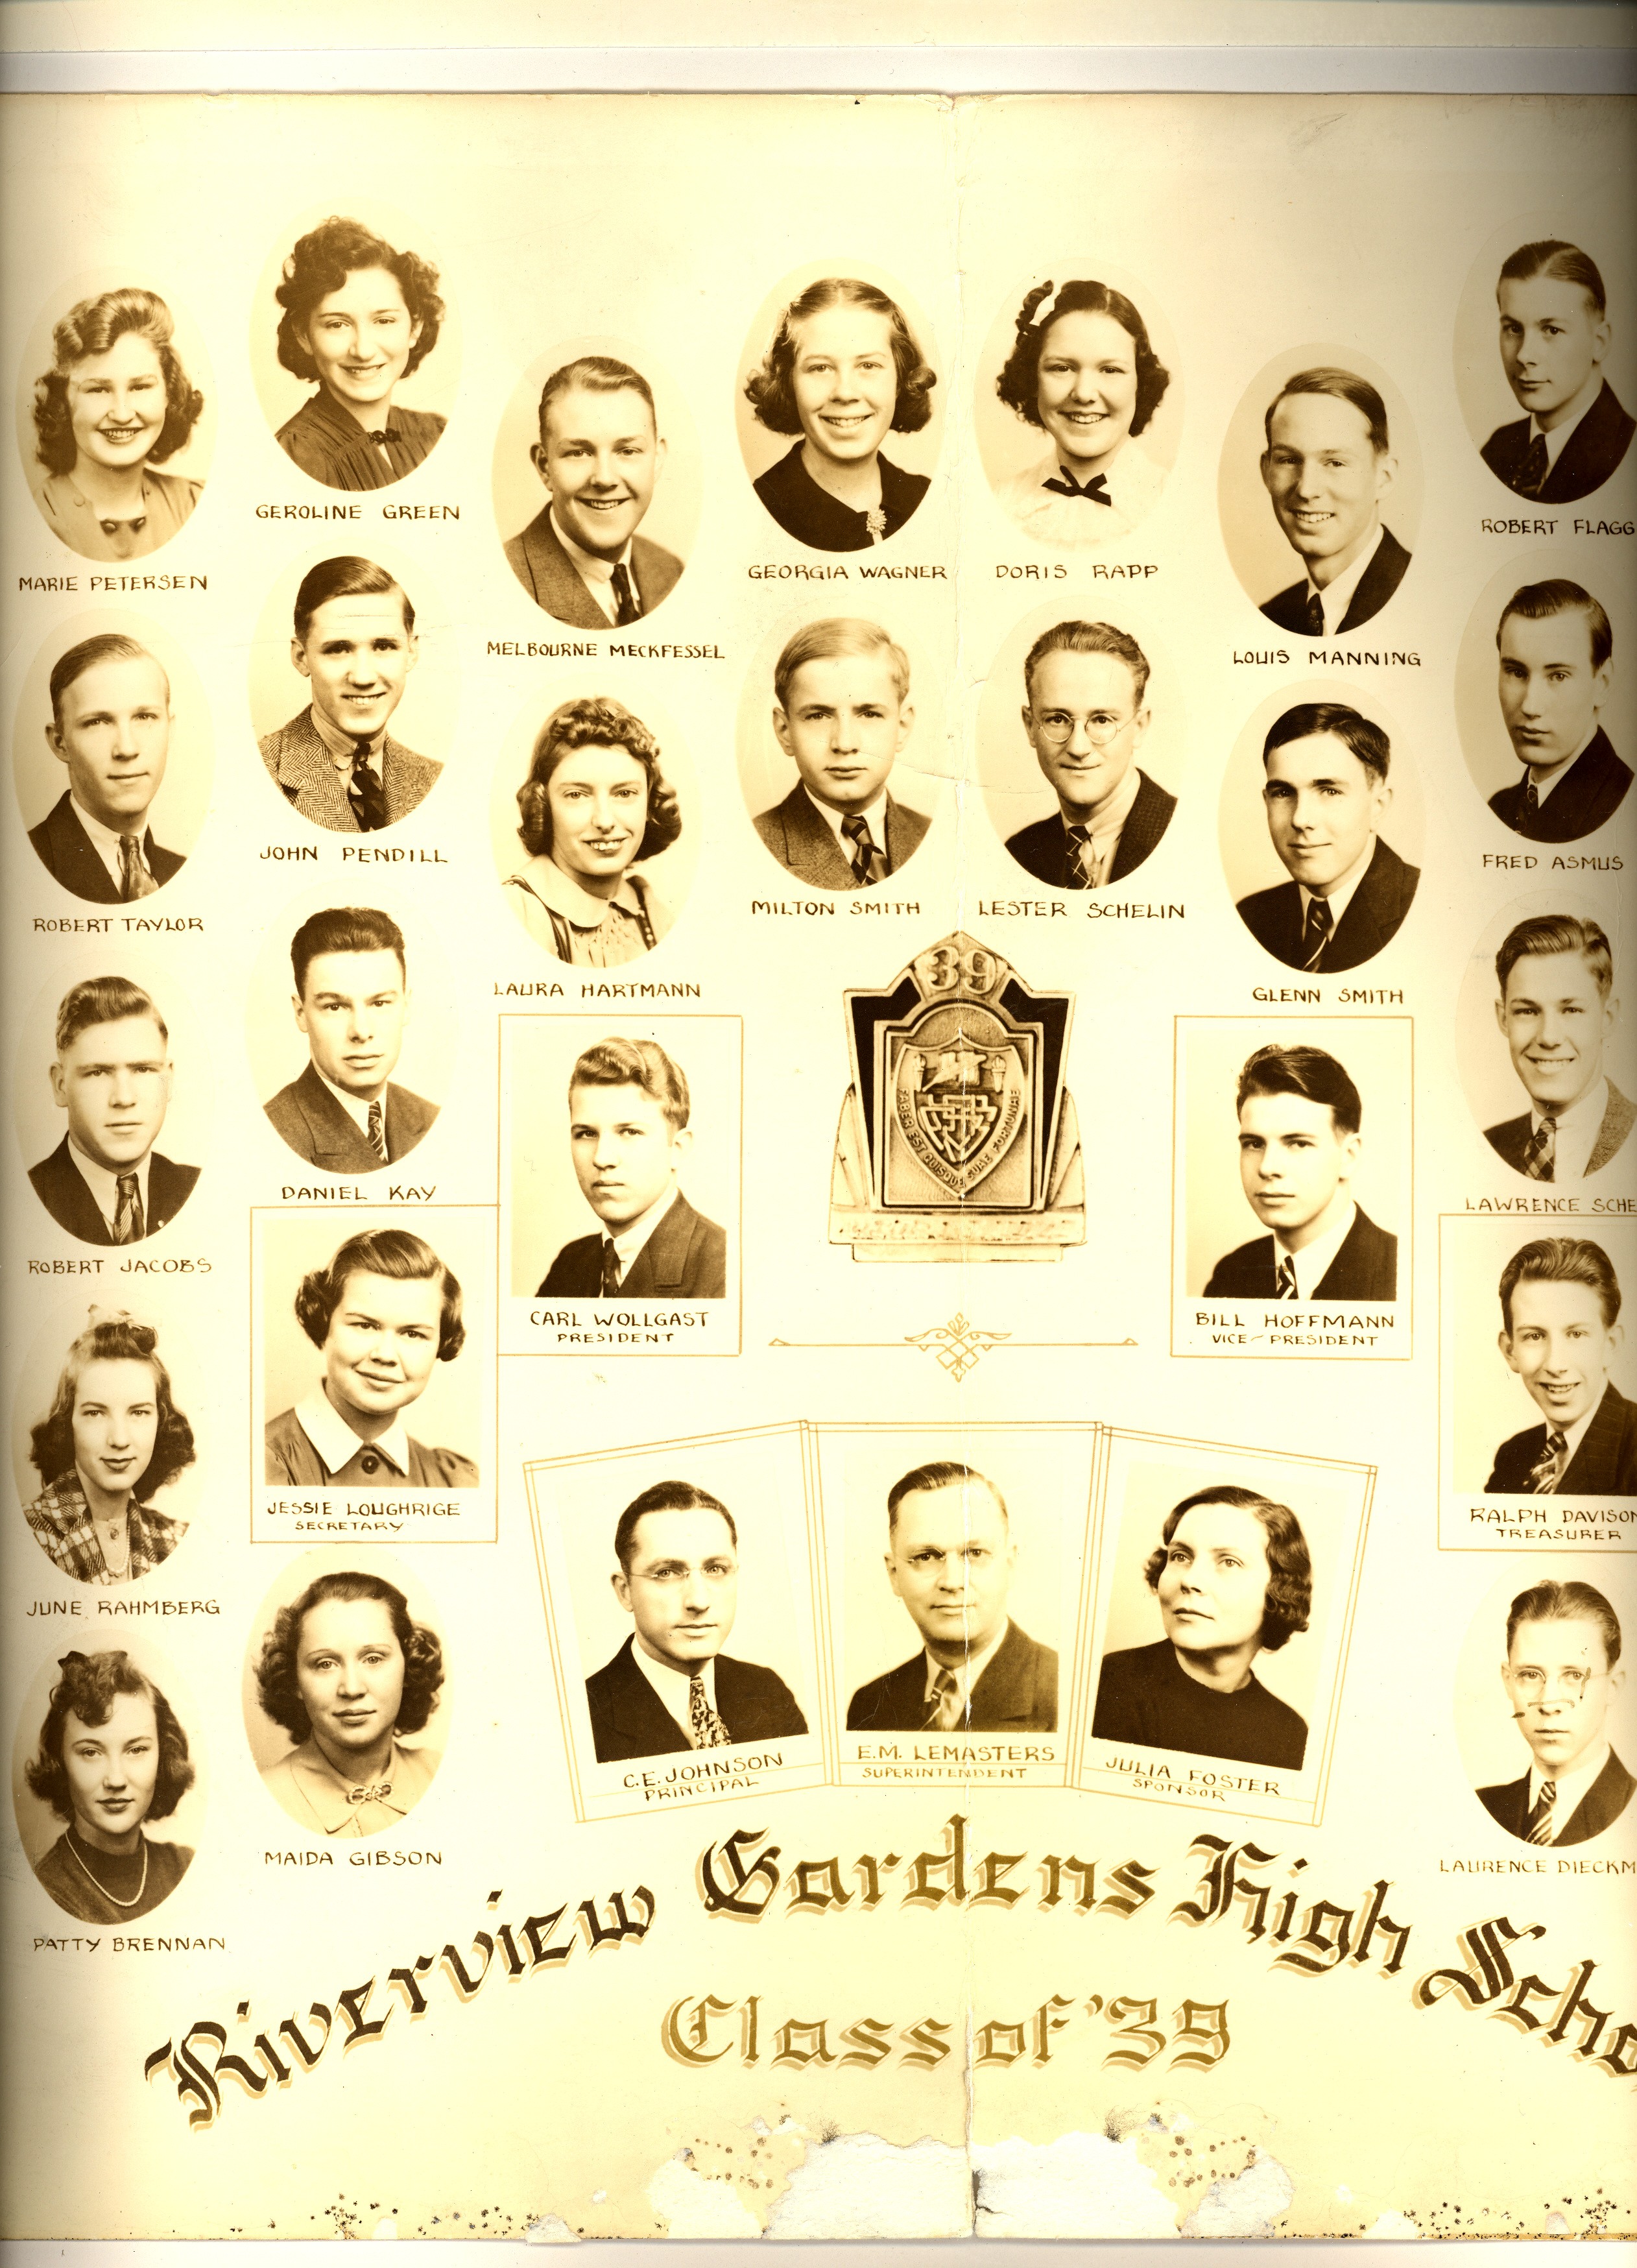 Riverview Gardens High School Class of '39: MANNING FAMILY COLLECTION. You can find Louis Manning in the top row and Lawrence Schewe in the vertical row on the far right. They graduated from RGHS 30 years before Dave and Denise graduated from RGHS!